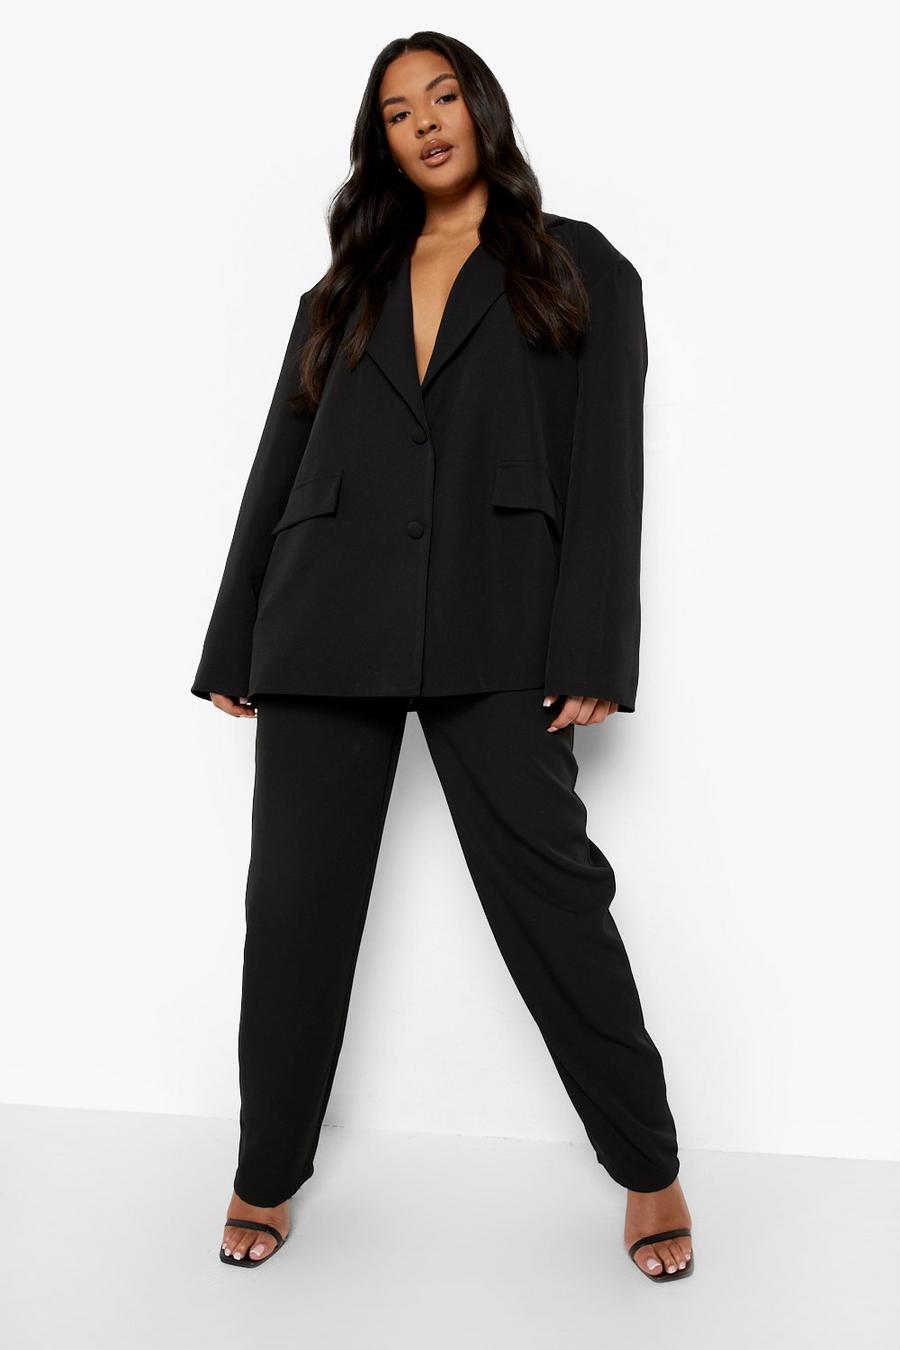 Black nero Plus Super Skinny Double Breasted Blazer & Trousers Suits